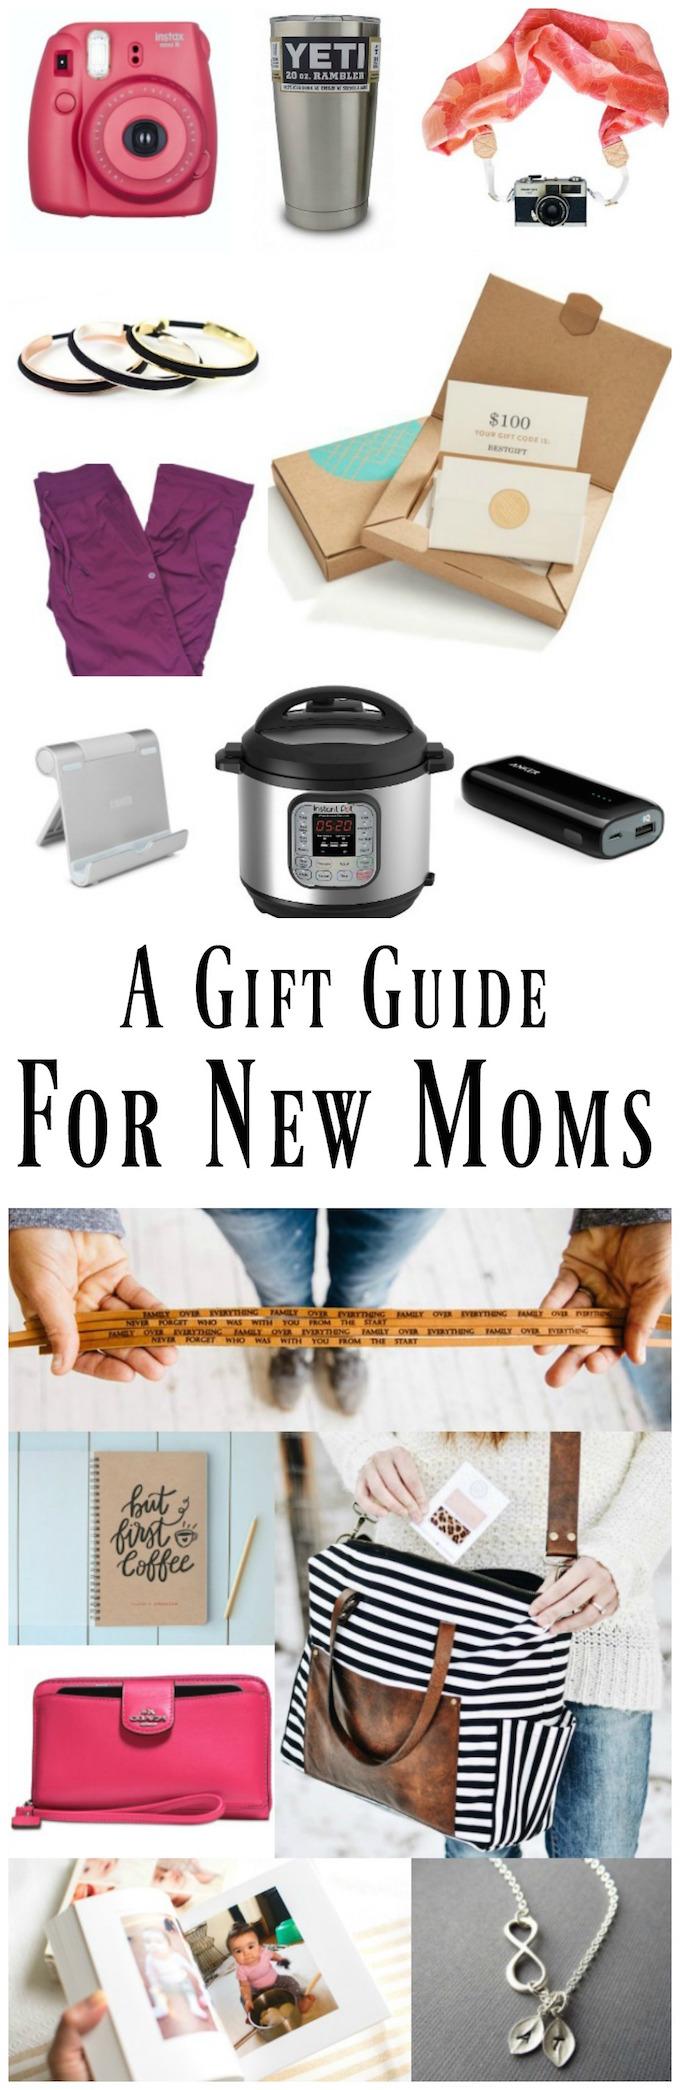 Looking for gifts for new moms this Christmas? Here are 15 ideas that would make great presents for the moms in your life!